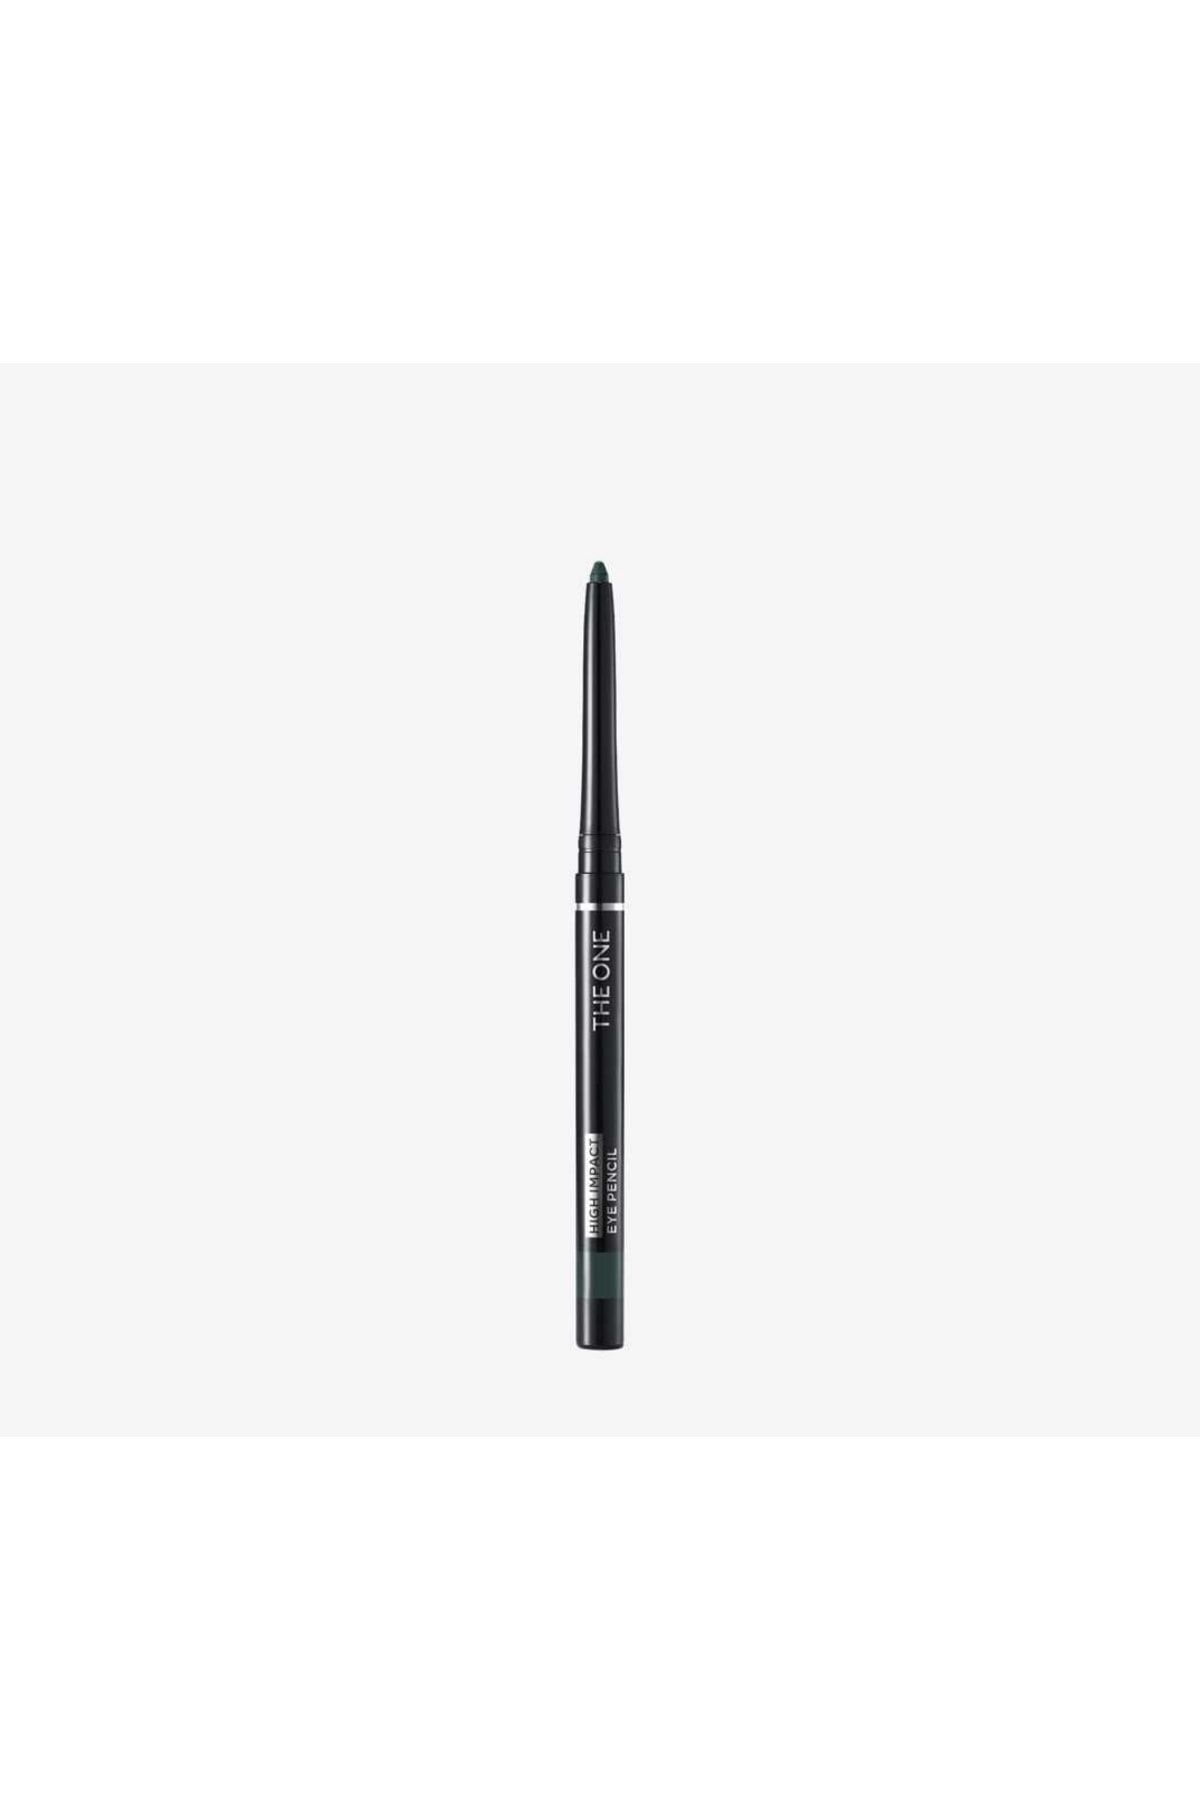 Oriflame The One High Impact Göz Kalemi Forest Green